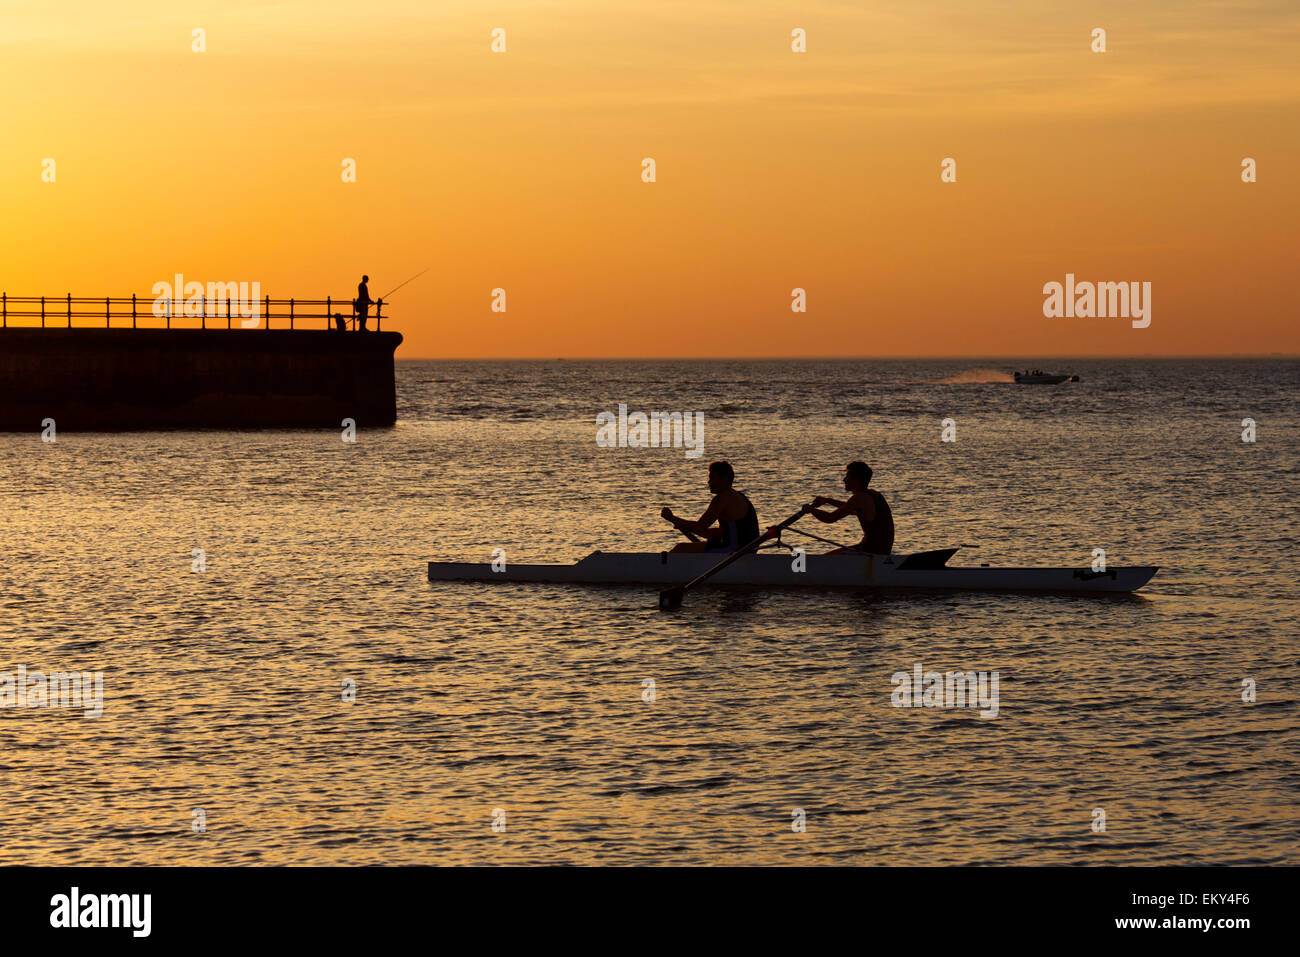 Hampton, Kent, UK. 14th April 2015: UK Weather. Sunset at Hampton near Herne Bay in Kent as an angler fishes from the pier, rowers and a speedboat are making the most of the last rays of light after a glorious hot day with more good weather forecast for Wednesday Stock Photo